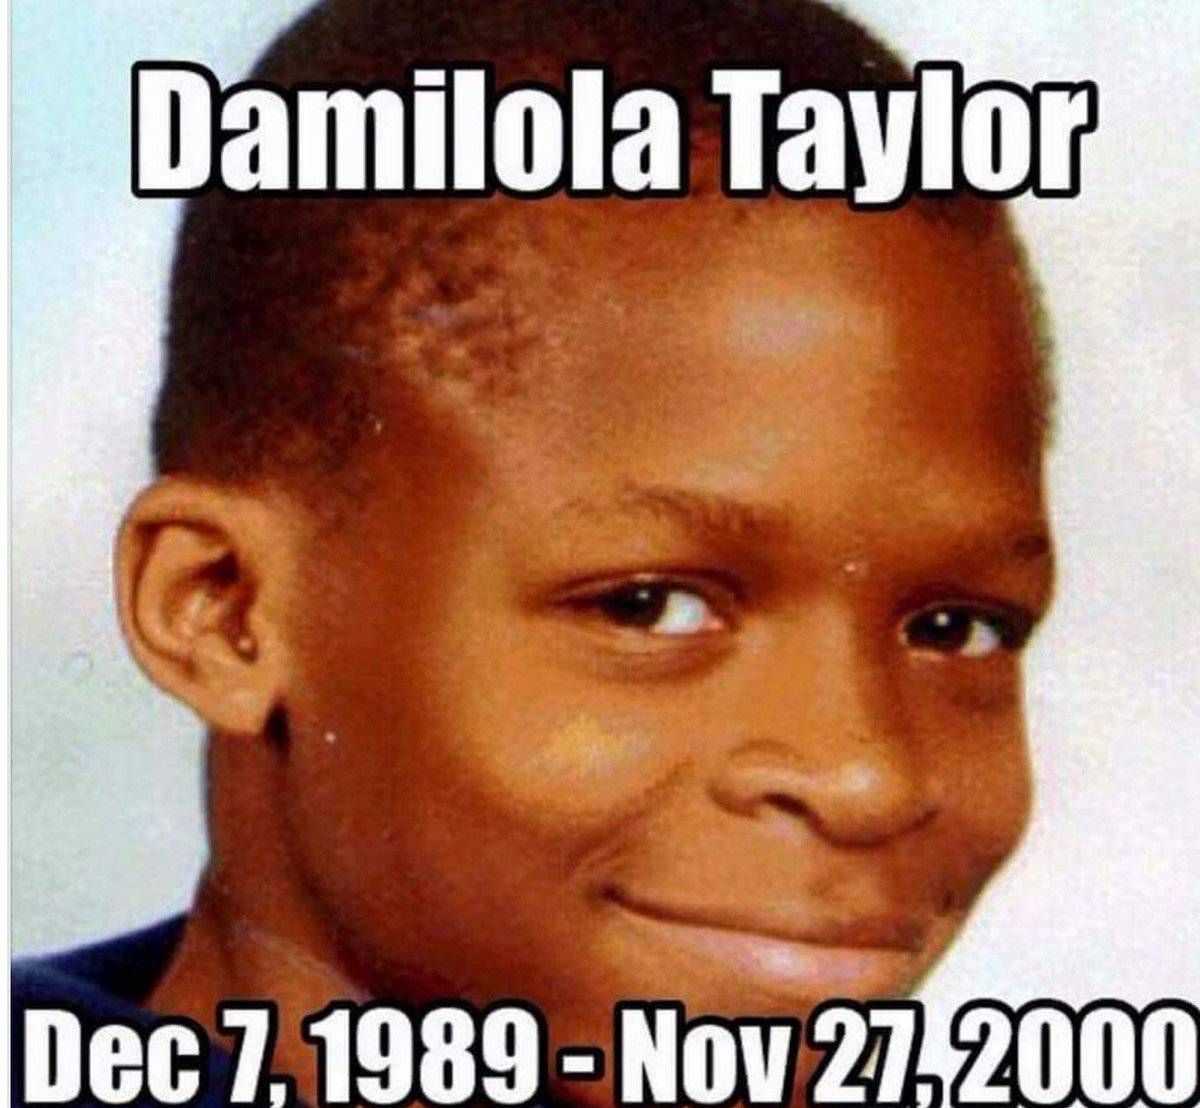 Remembering #damilolataylor #DamilolaOurLovedBoy today...
May his family and loved ones be comforted today for their lost angel. 😇❤